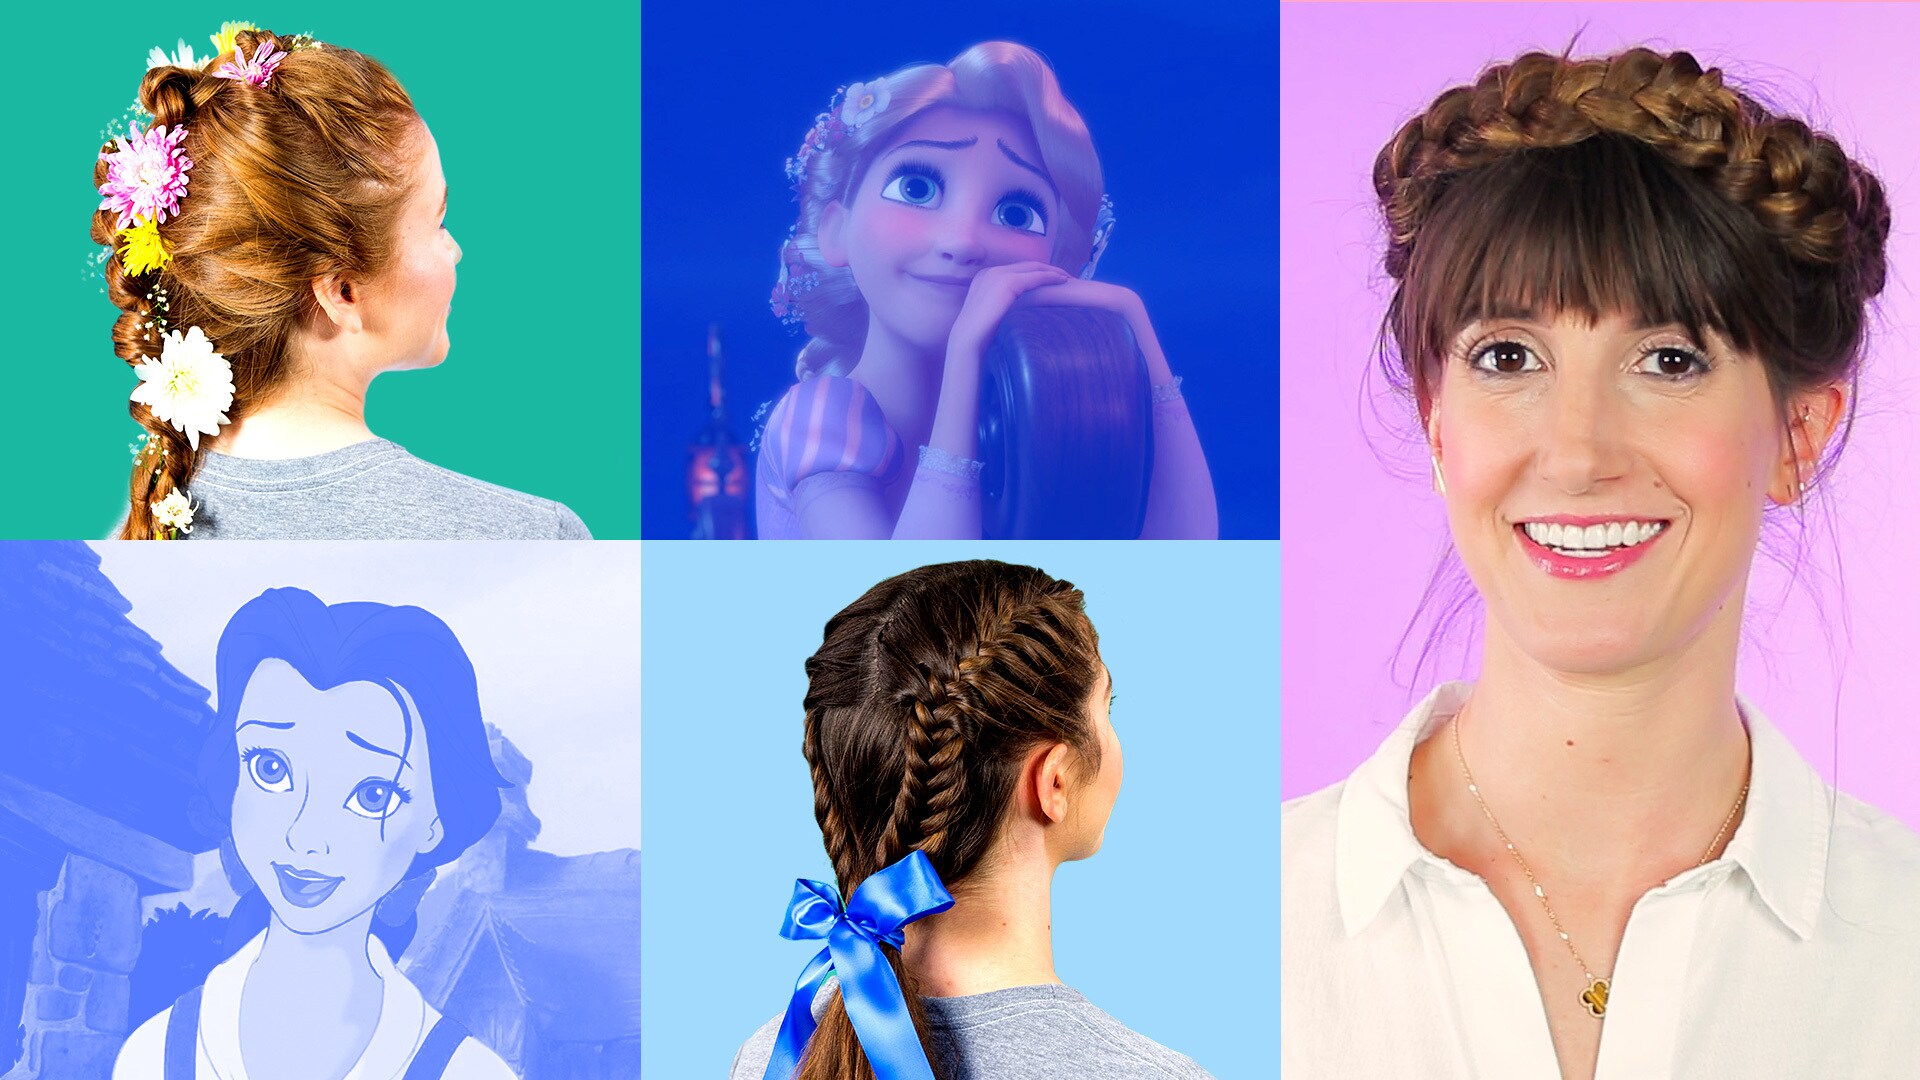 How to Try Those Disney Princess Hairstyles At Home - MickeyBlog.com